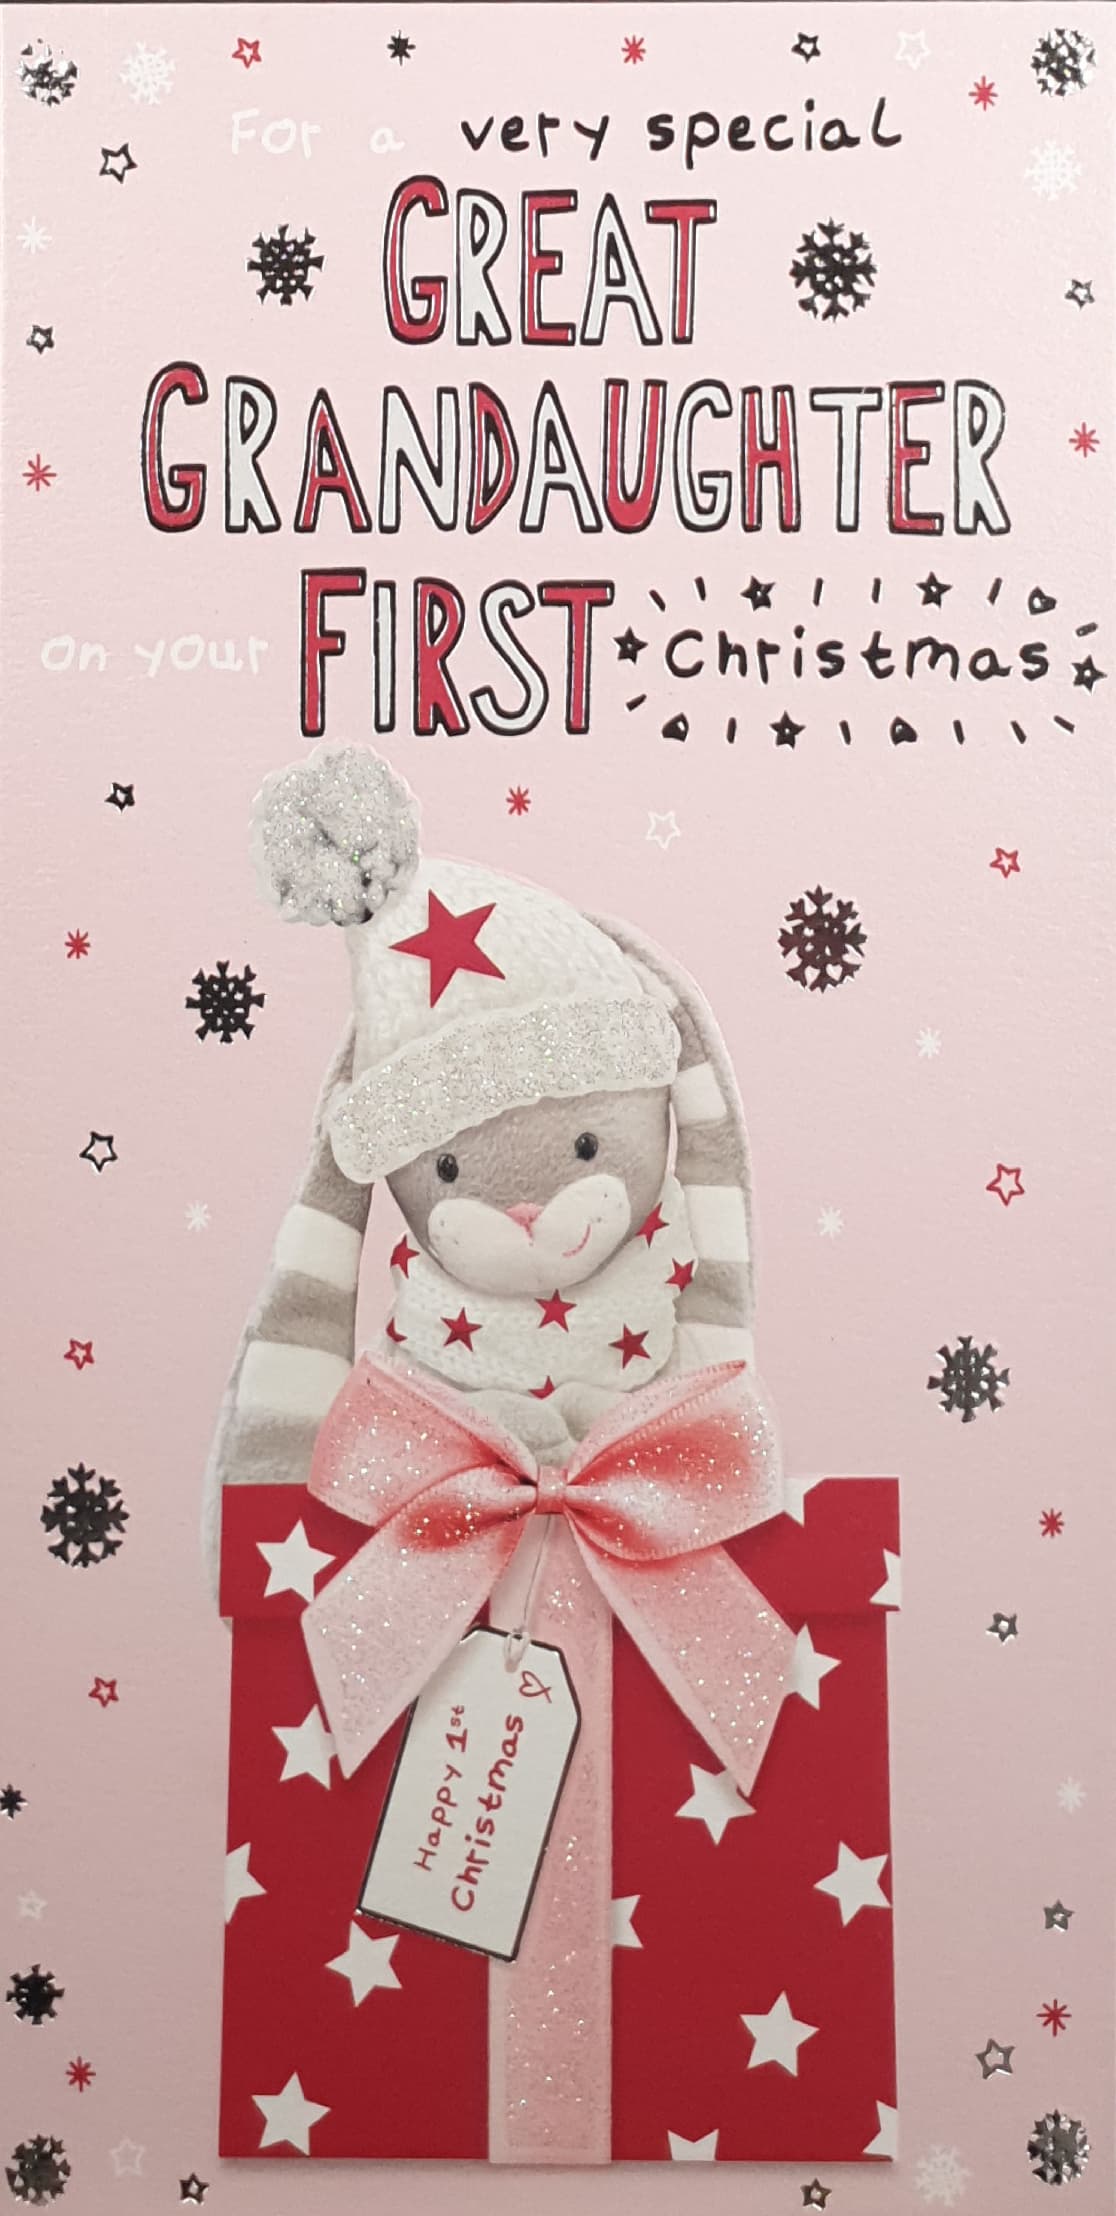 Great Grandaughter First Christmas Card - Cute Bunny Wearing Hat & Gift